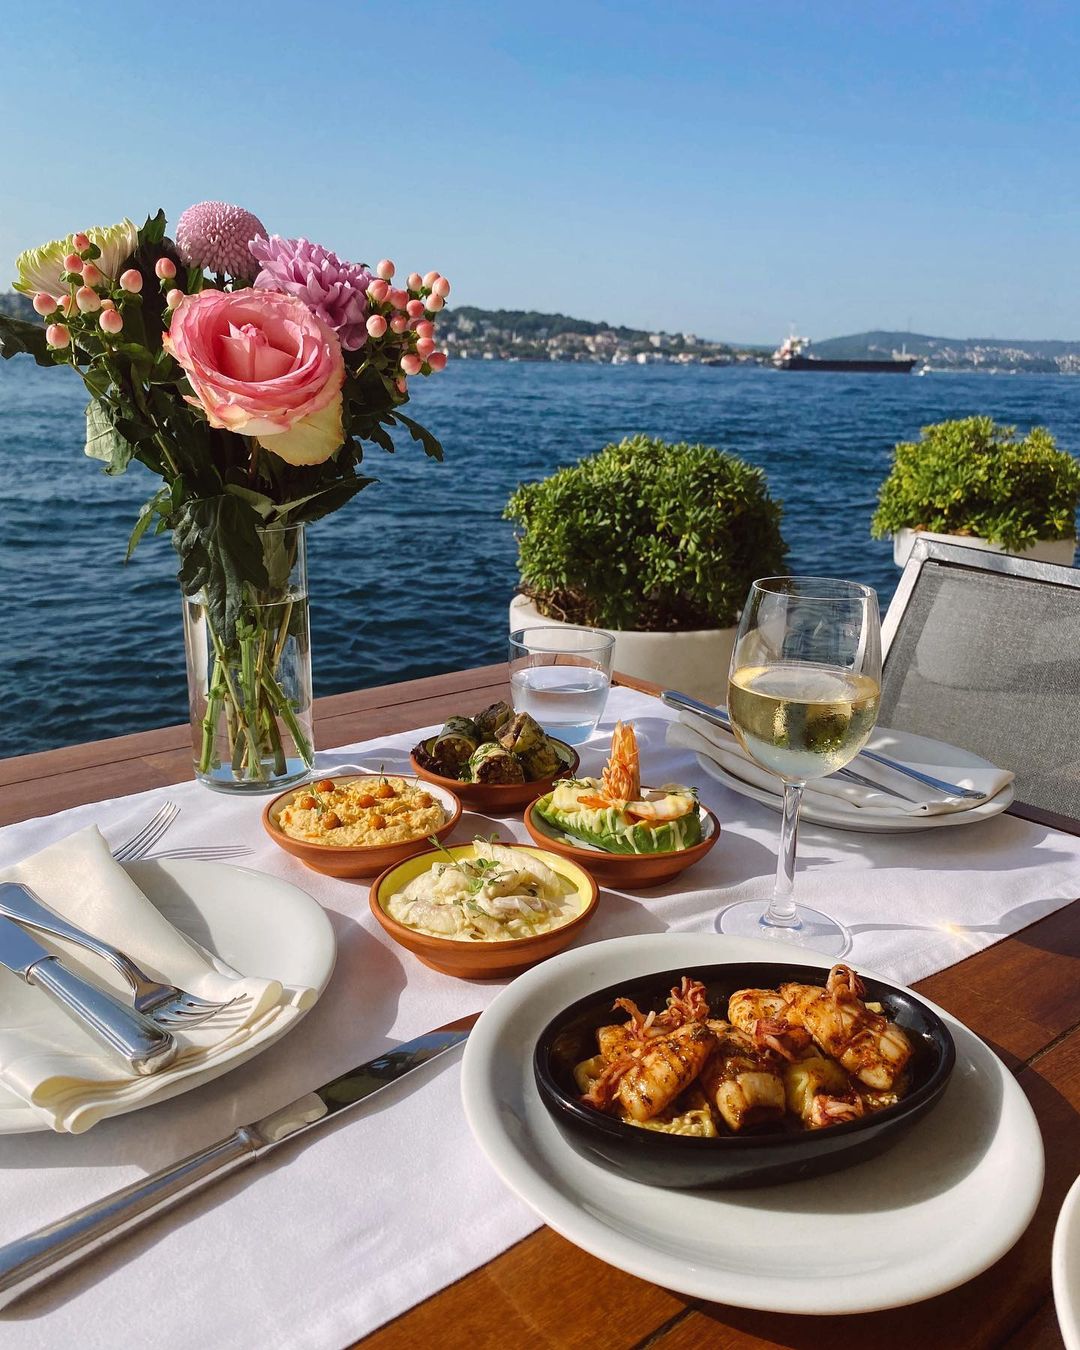 Sunny day and delicious food at A’jia Restaurant - Best Restaurants with Bosphorus View